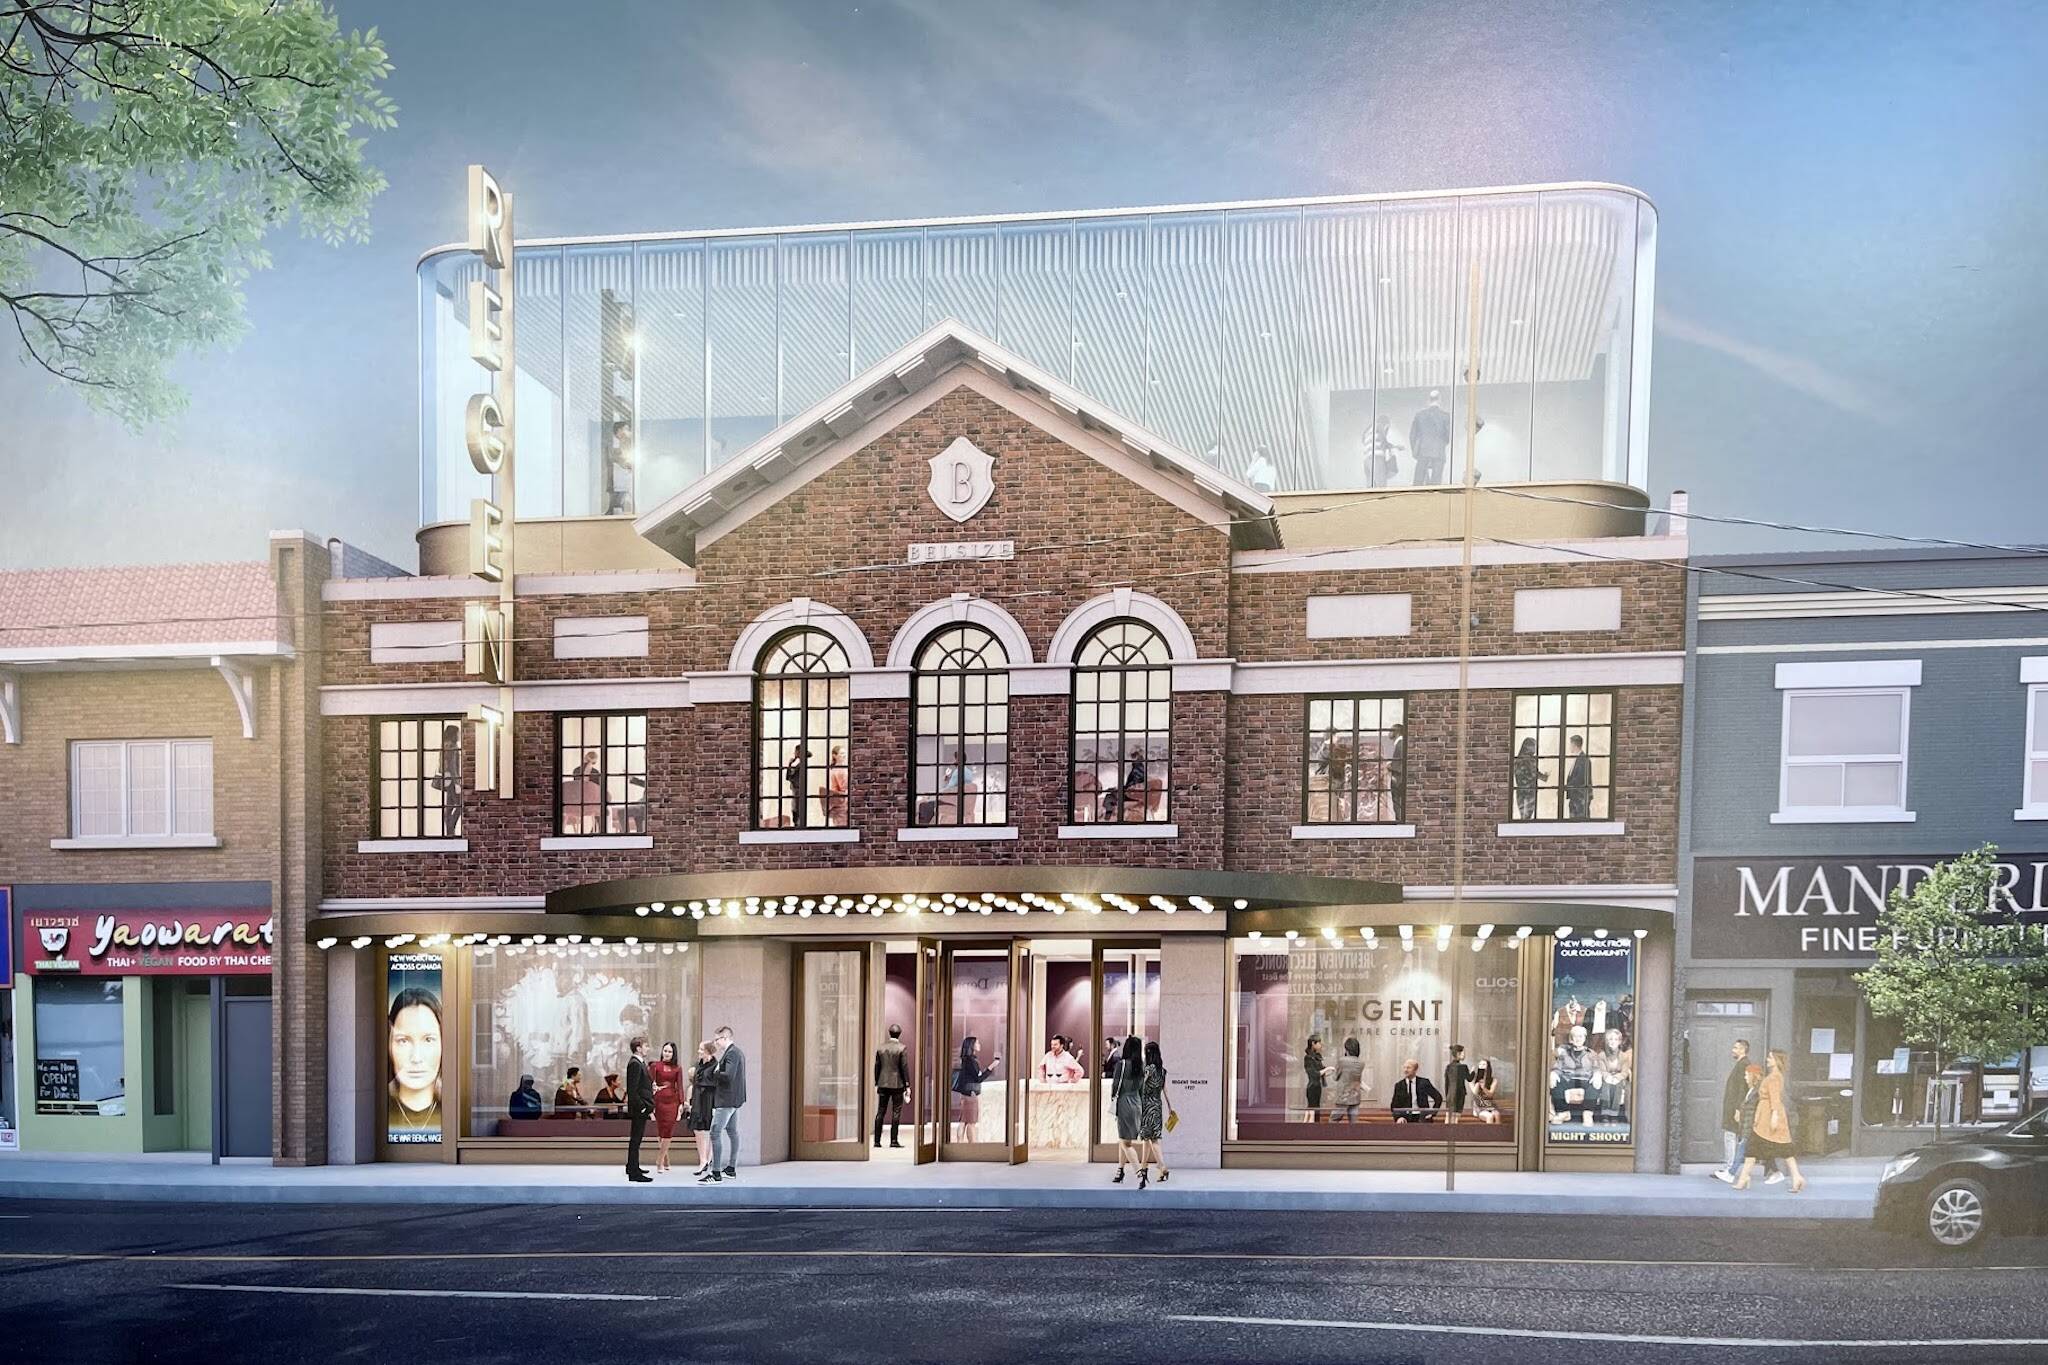 Toronto movie theatre getting major revamp with glass-enclosed rooftop